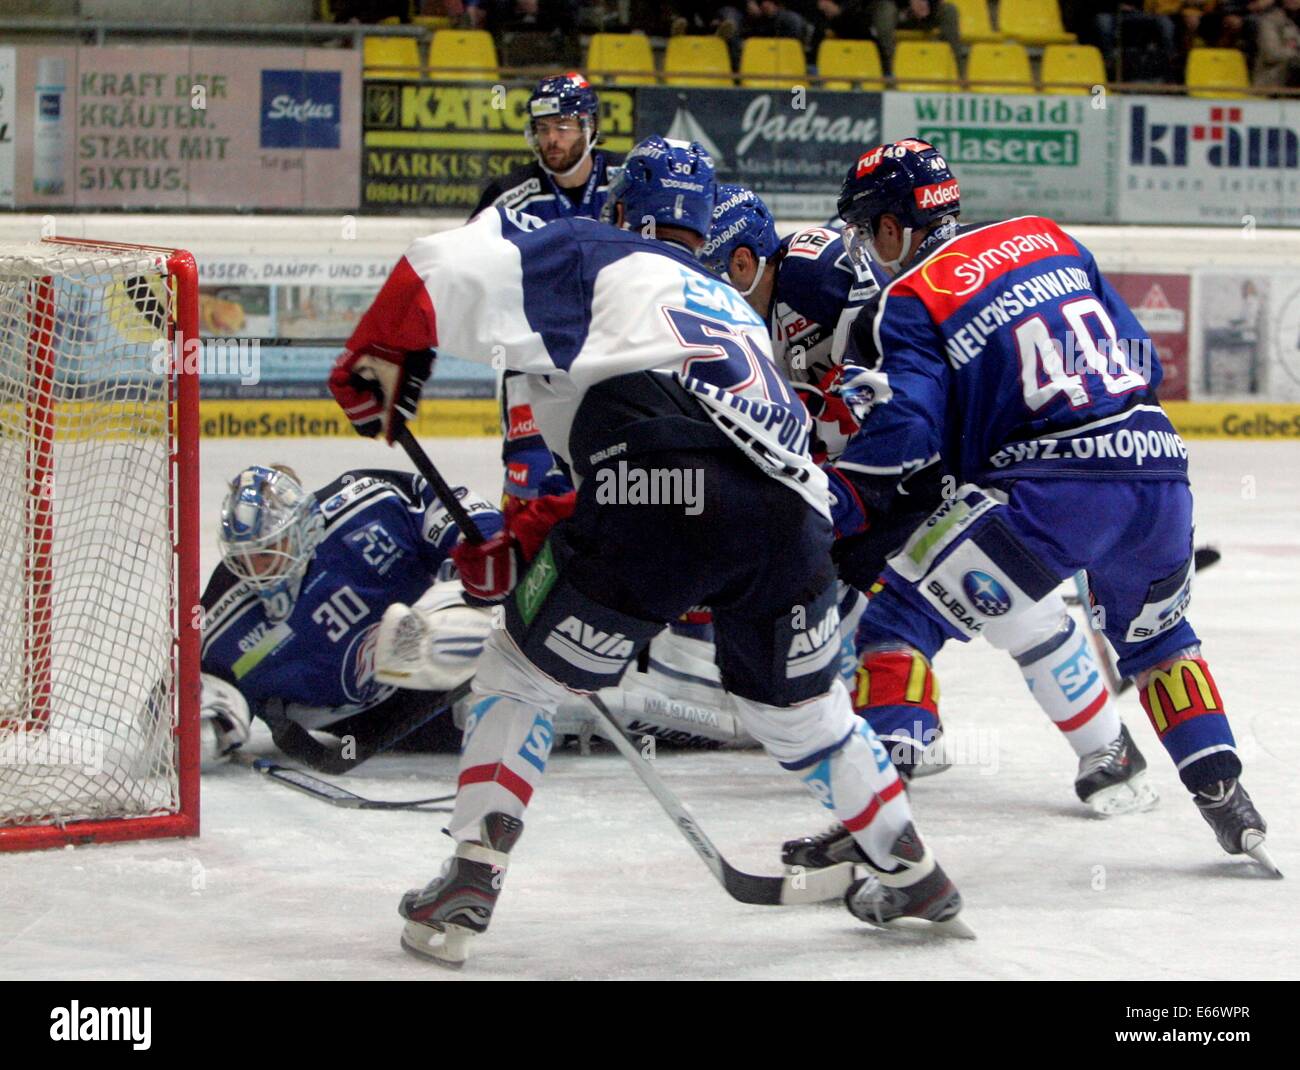 Bad Toelz, Bavaria, Germany. 15th Aug, 2014. from left goalkeeper Lukas FUEELER/Zuerich, Glen METROPOLIT/CAN/Mannheim, Jan NEUENSCHWANDER/Zuerich, .two top teams from Germany and Switzerland meet for a ice hockey friendly as preparation for the season, ZSC Lions Zuerich vs Adler Mannheim, August 15, 2014, Bad Toelz, Germany, Credit:  Wolfgang Fehrmann/Wolfgang Fehrmann/ZUMA Wire/Alamy Live News Stock Photo